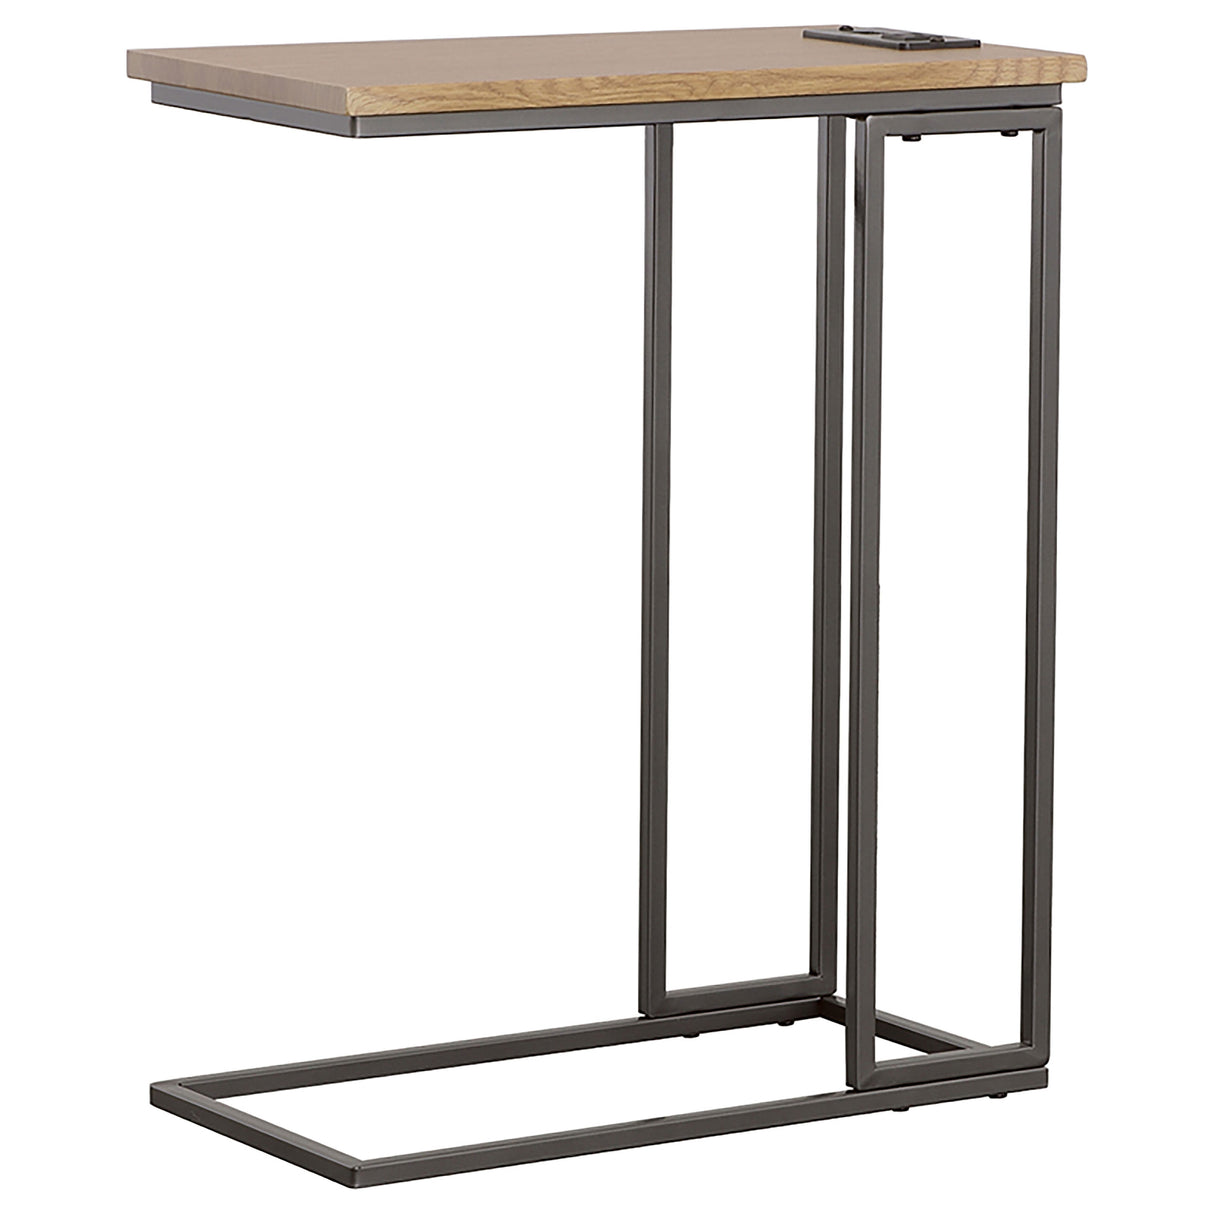 Side Table - Rudy Snack Table with Power Outlet Gunmetal and Natural